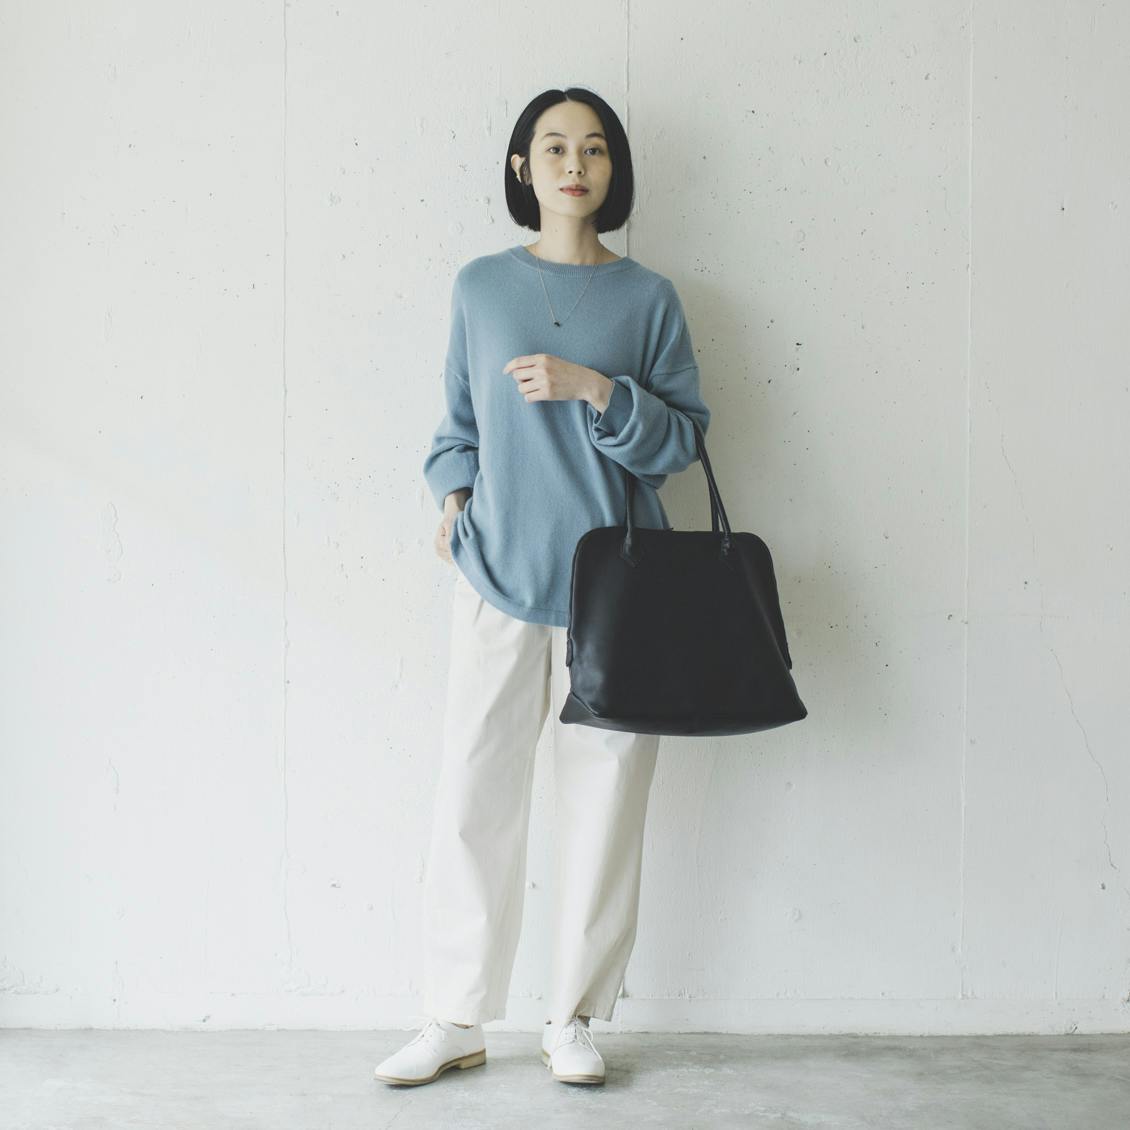 CLASKA  THE FACTORY / レザートートバッグ / Silva Tote Bag Leather noir - 北欧、暮らしの道具店